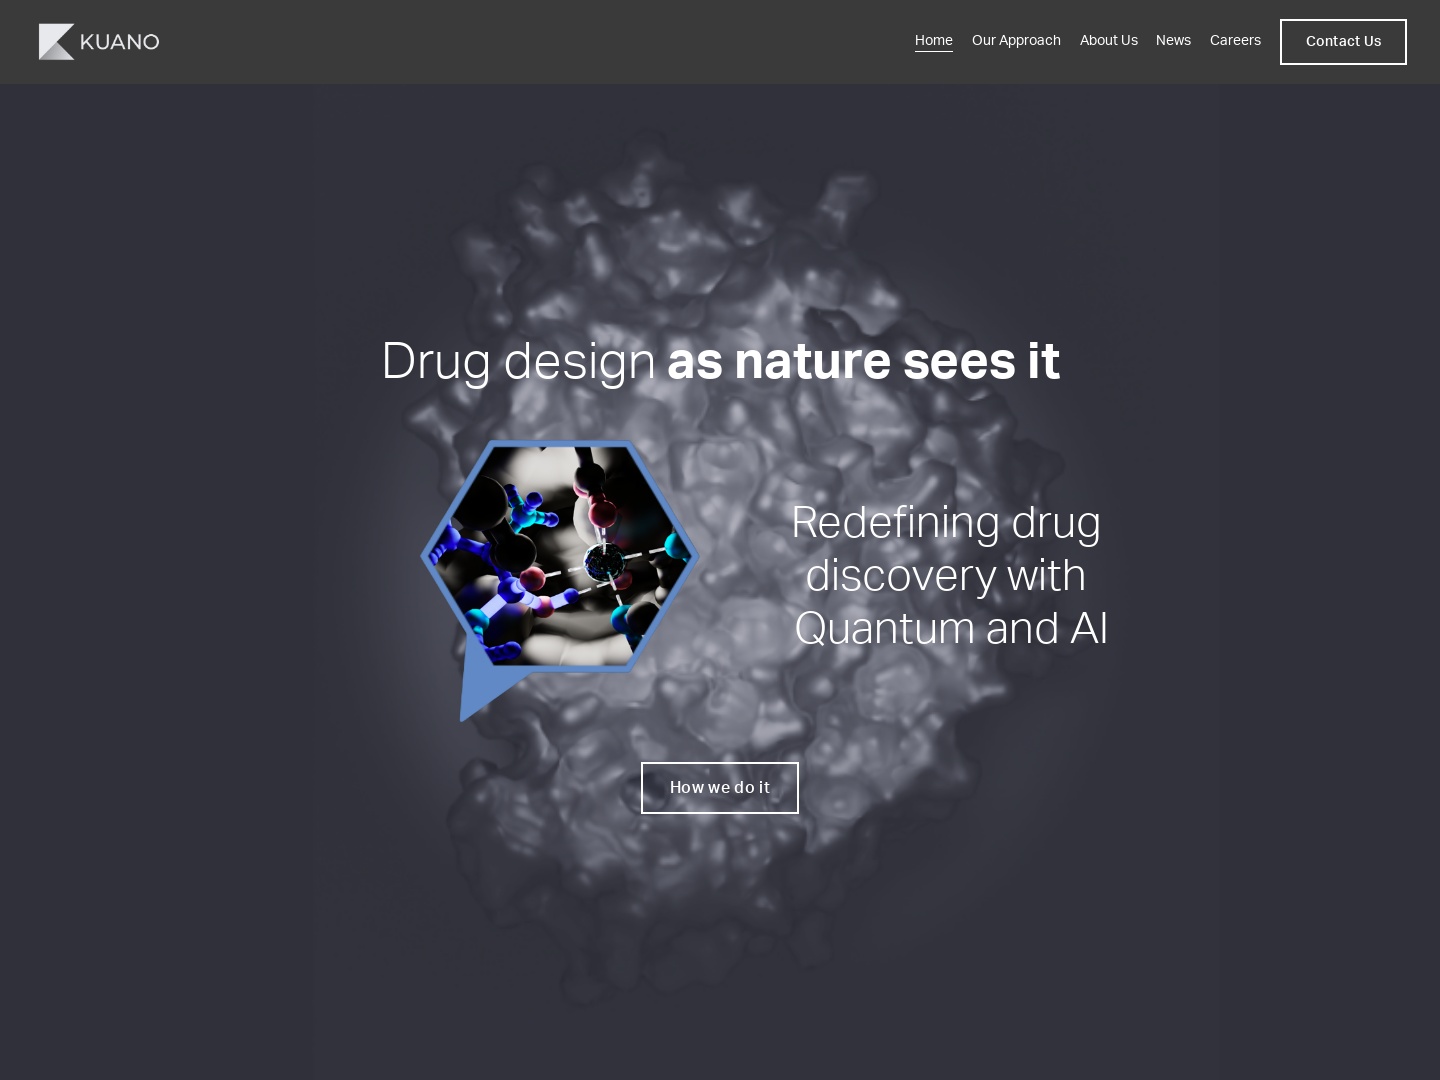 "Kuano Raises £1.8M Seed Funding for Quantum-Based Drug Discovery"